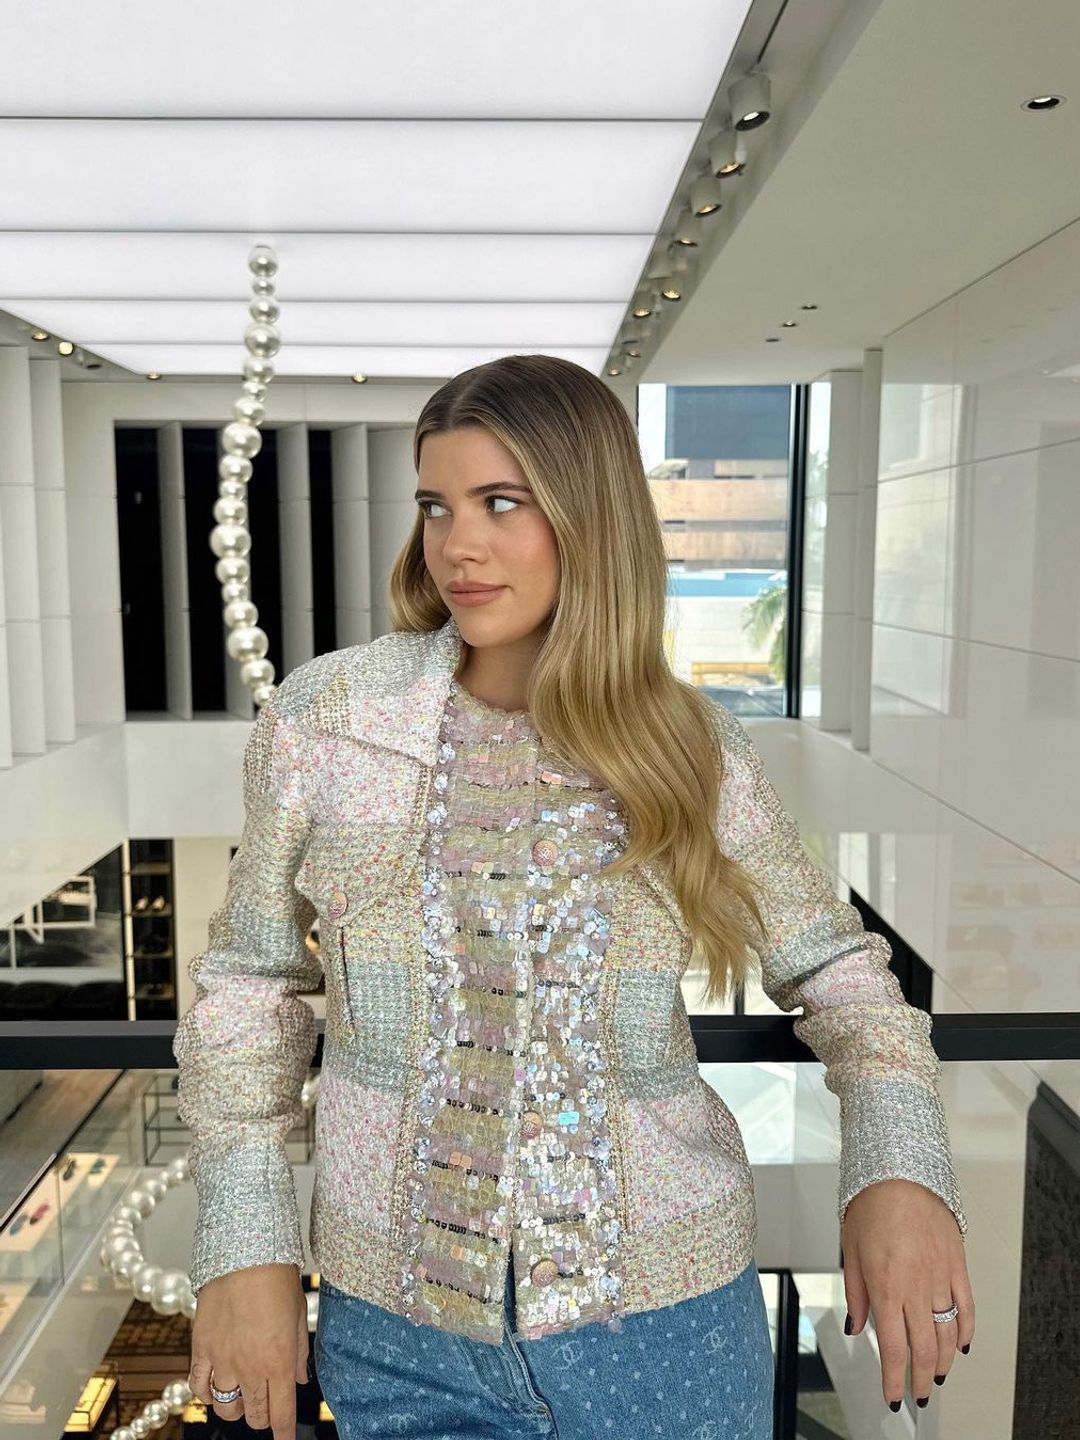 Sofia wore Look 14 from Chanel's latest LA-inspired Cruise Show